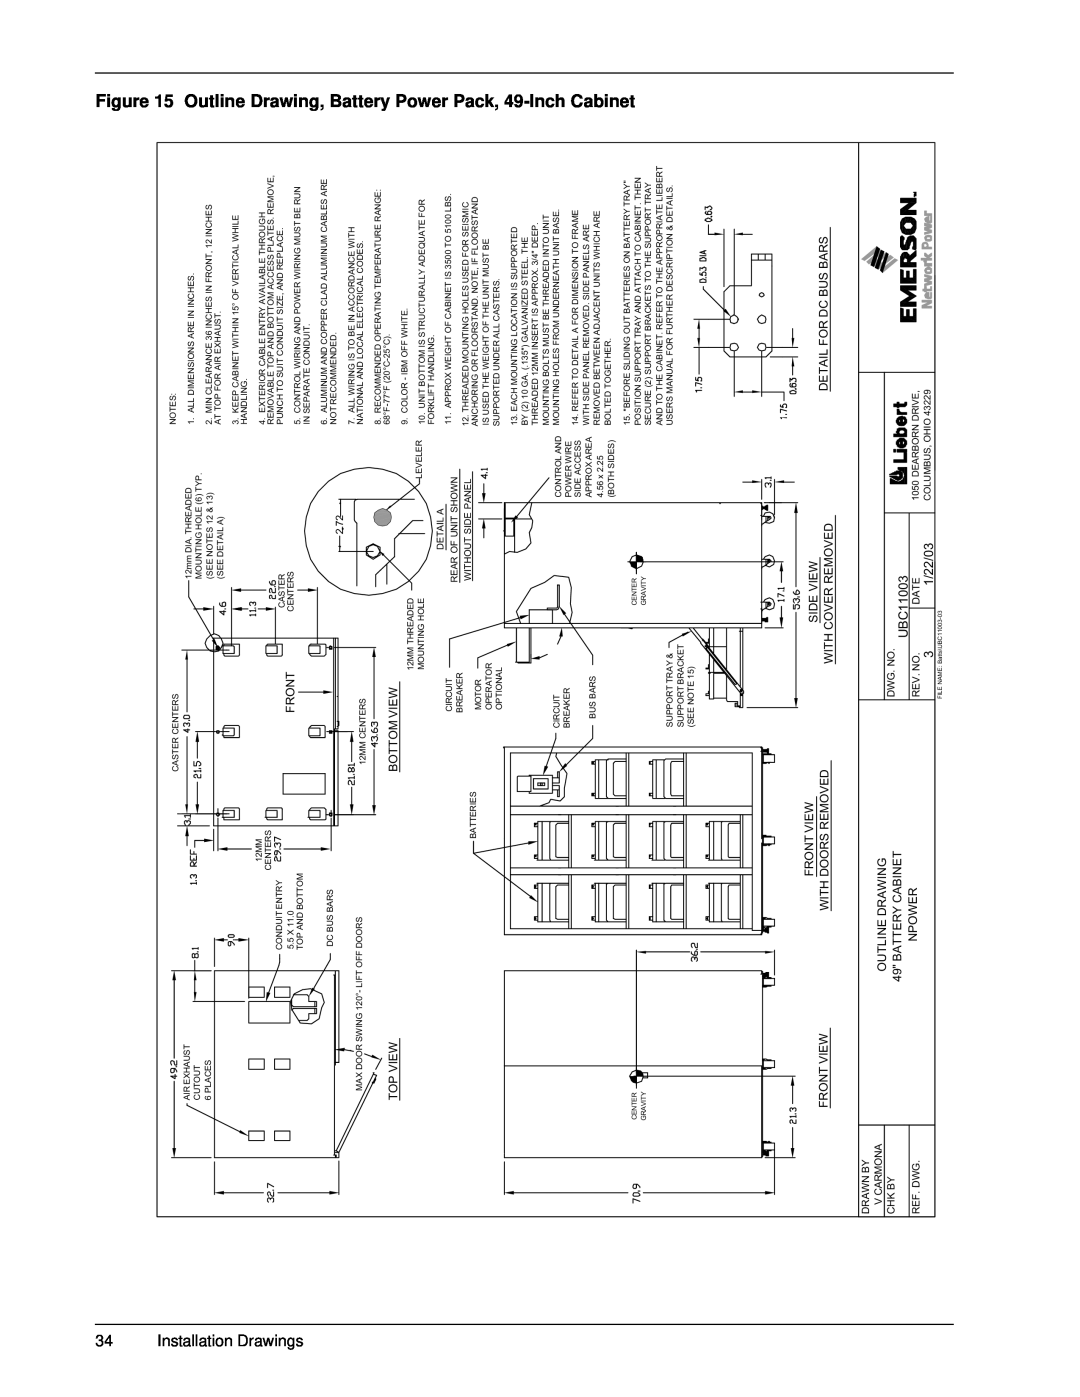 Emerson 30-130 kVA installation manual Outline Drawing, Installation Drawings, Battery Power 